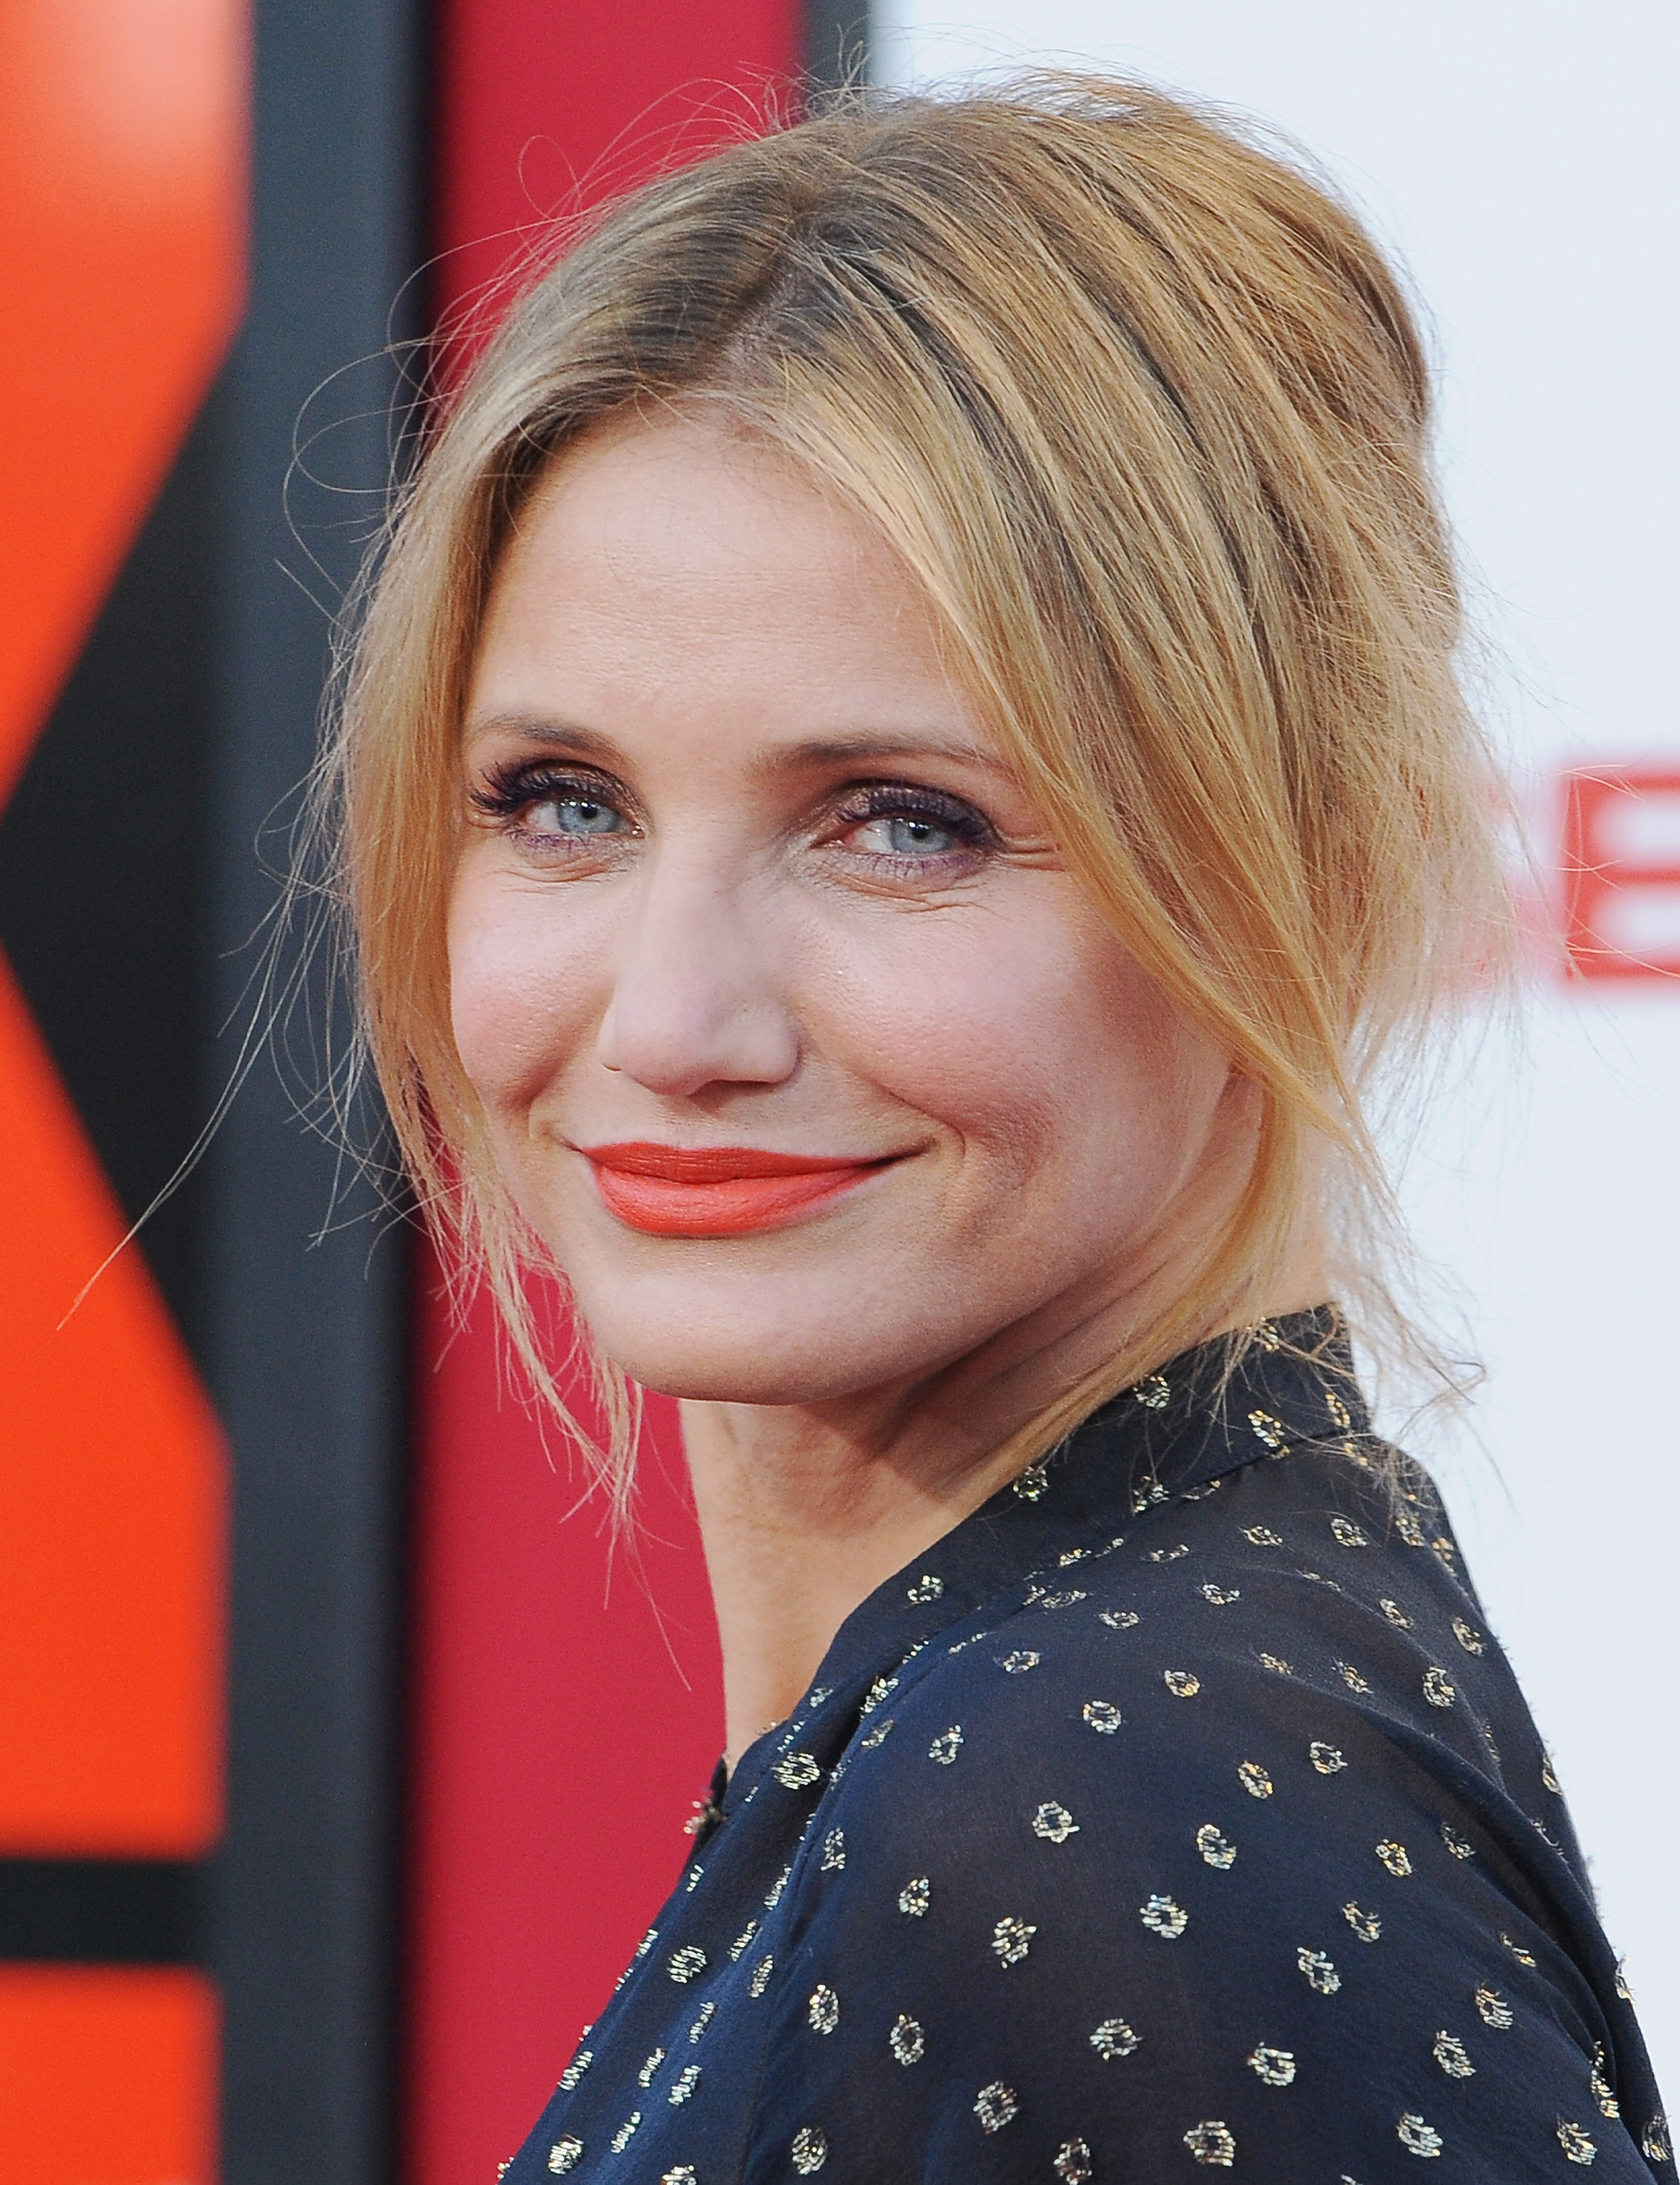 Cameron Diaz arrives at the Los Angeles Premiere "Sex Tape" at Regency Village Theatre on July 10, 2014, in Westwood, California | Source: Getty Images